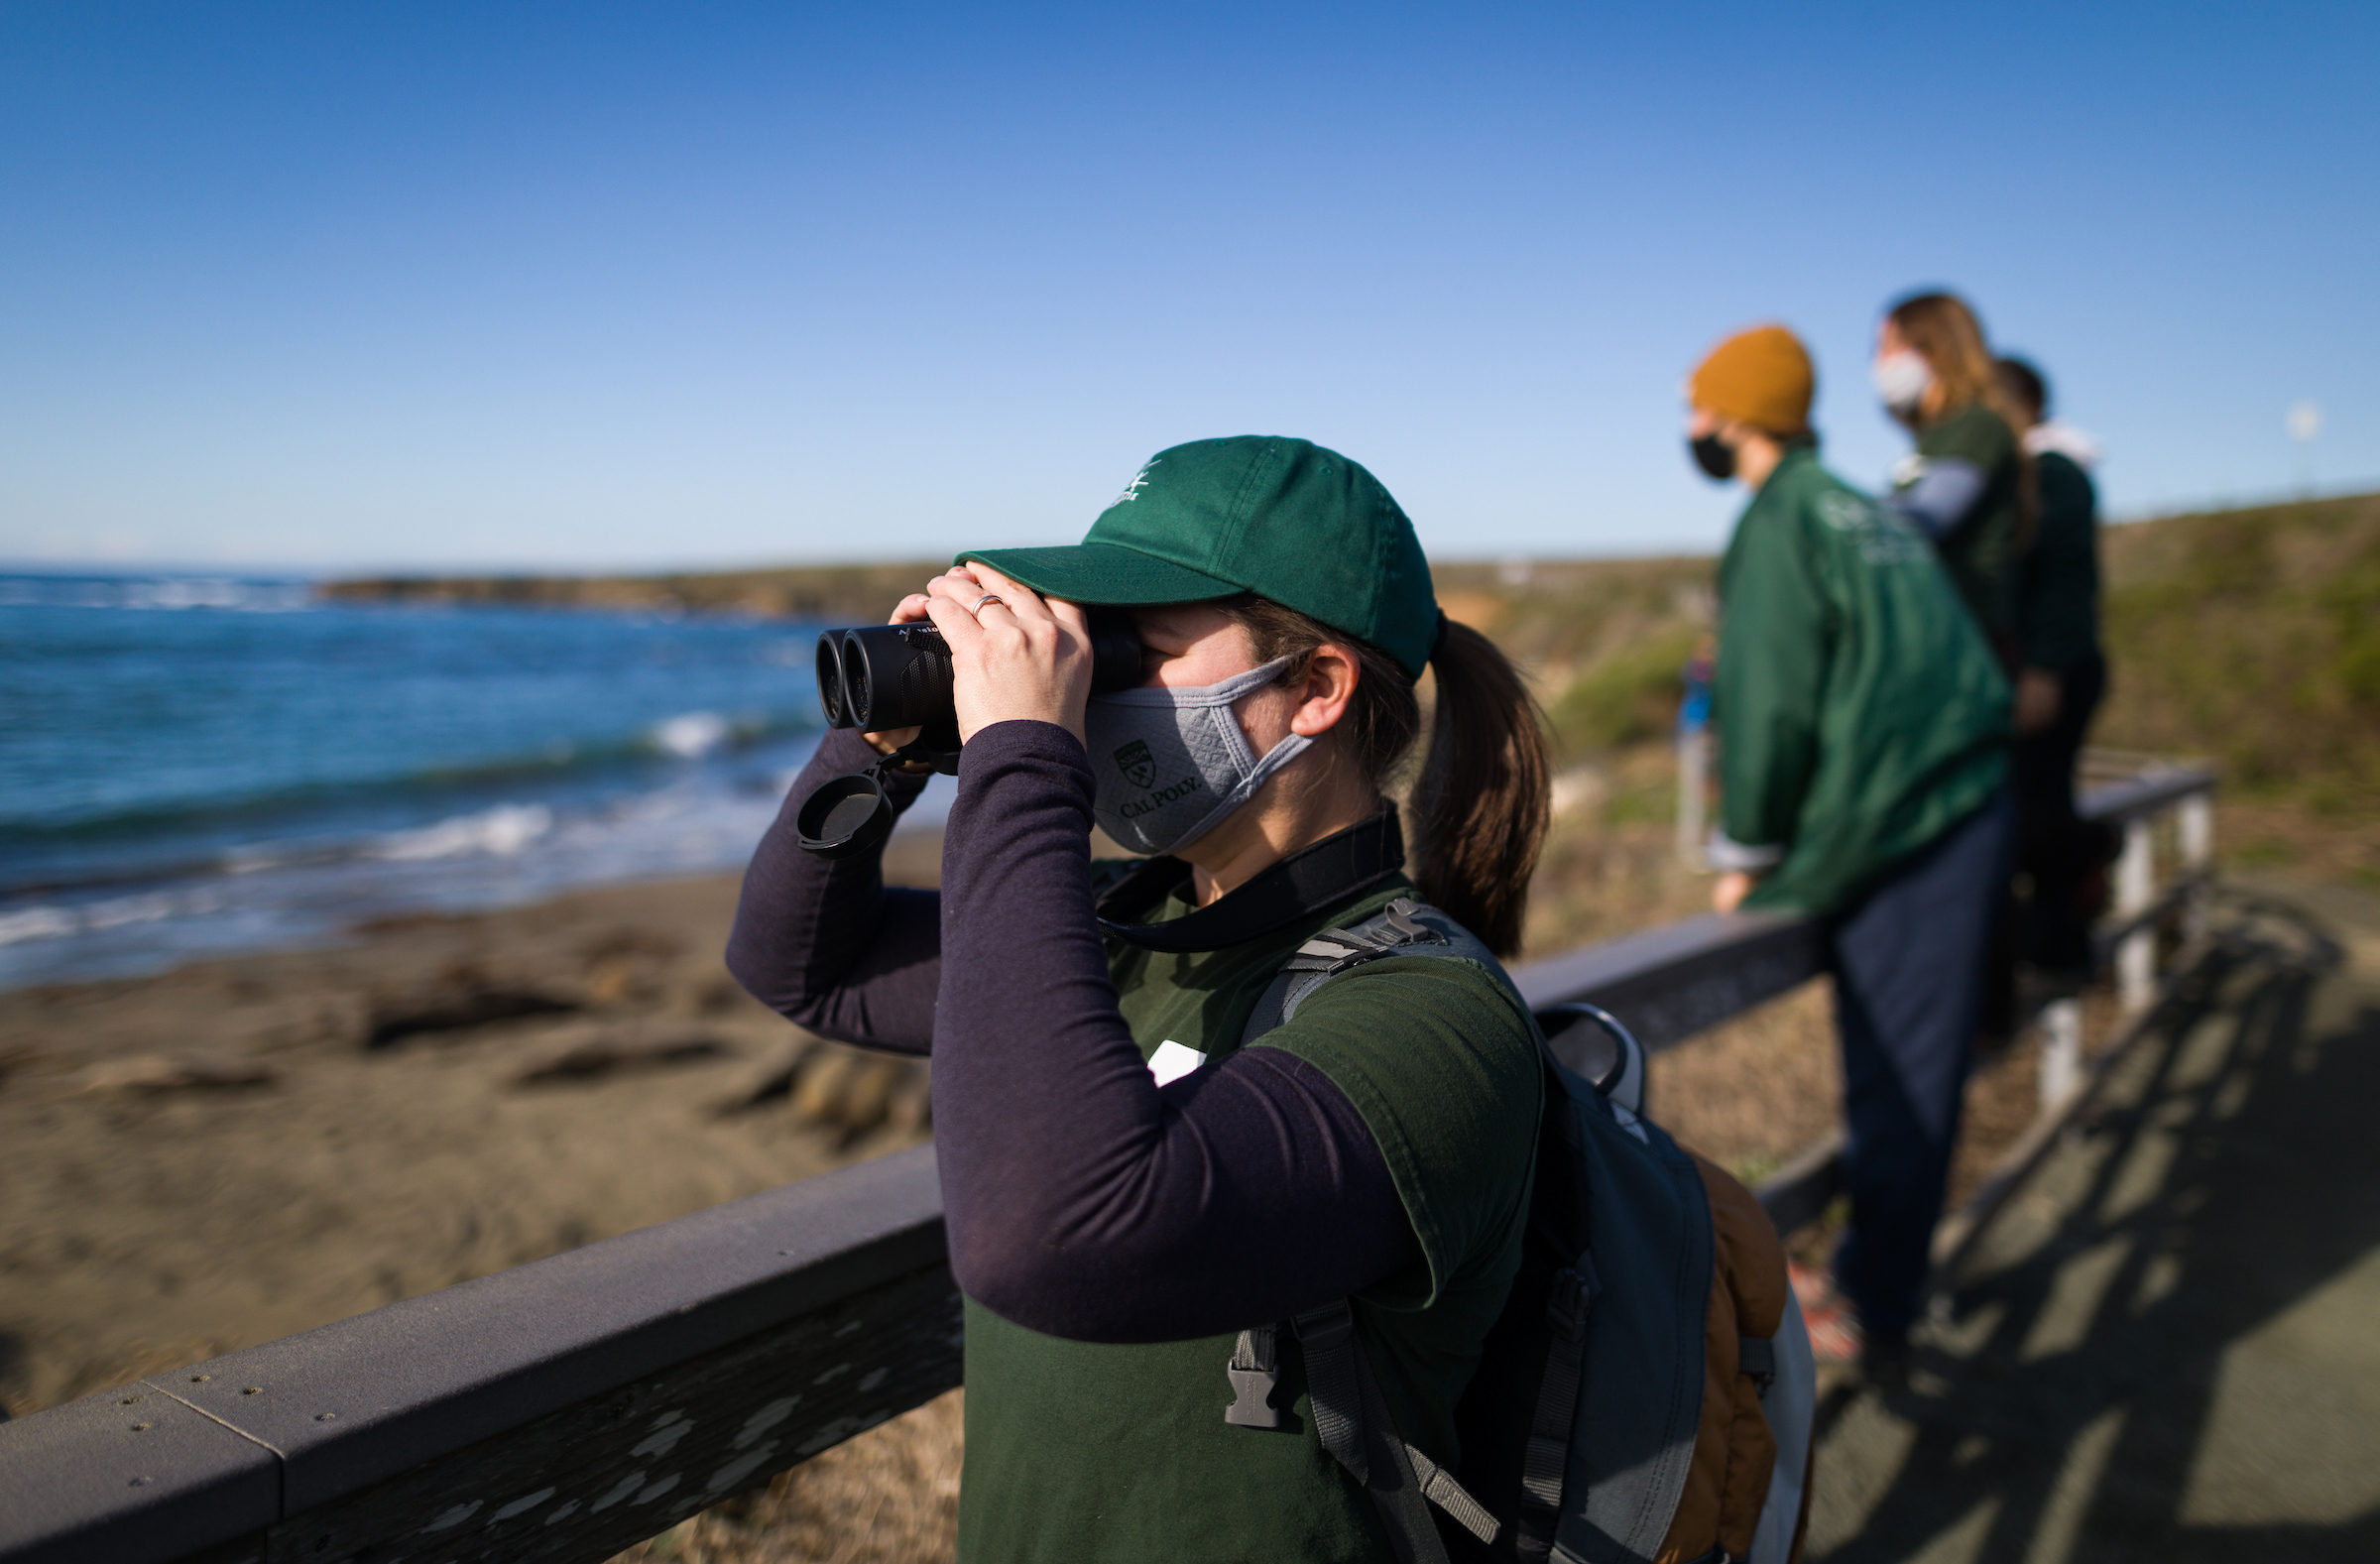 Professor Heather Liwanag uses binoculars to observe elephant seals at the Elephant Seal Vista Point north of Hearst Castle.